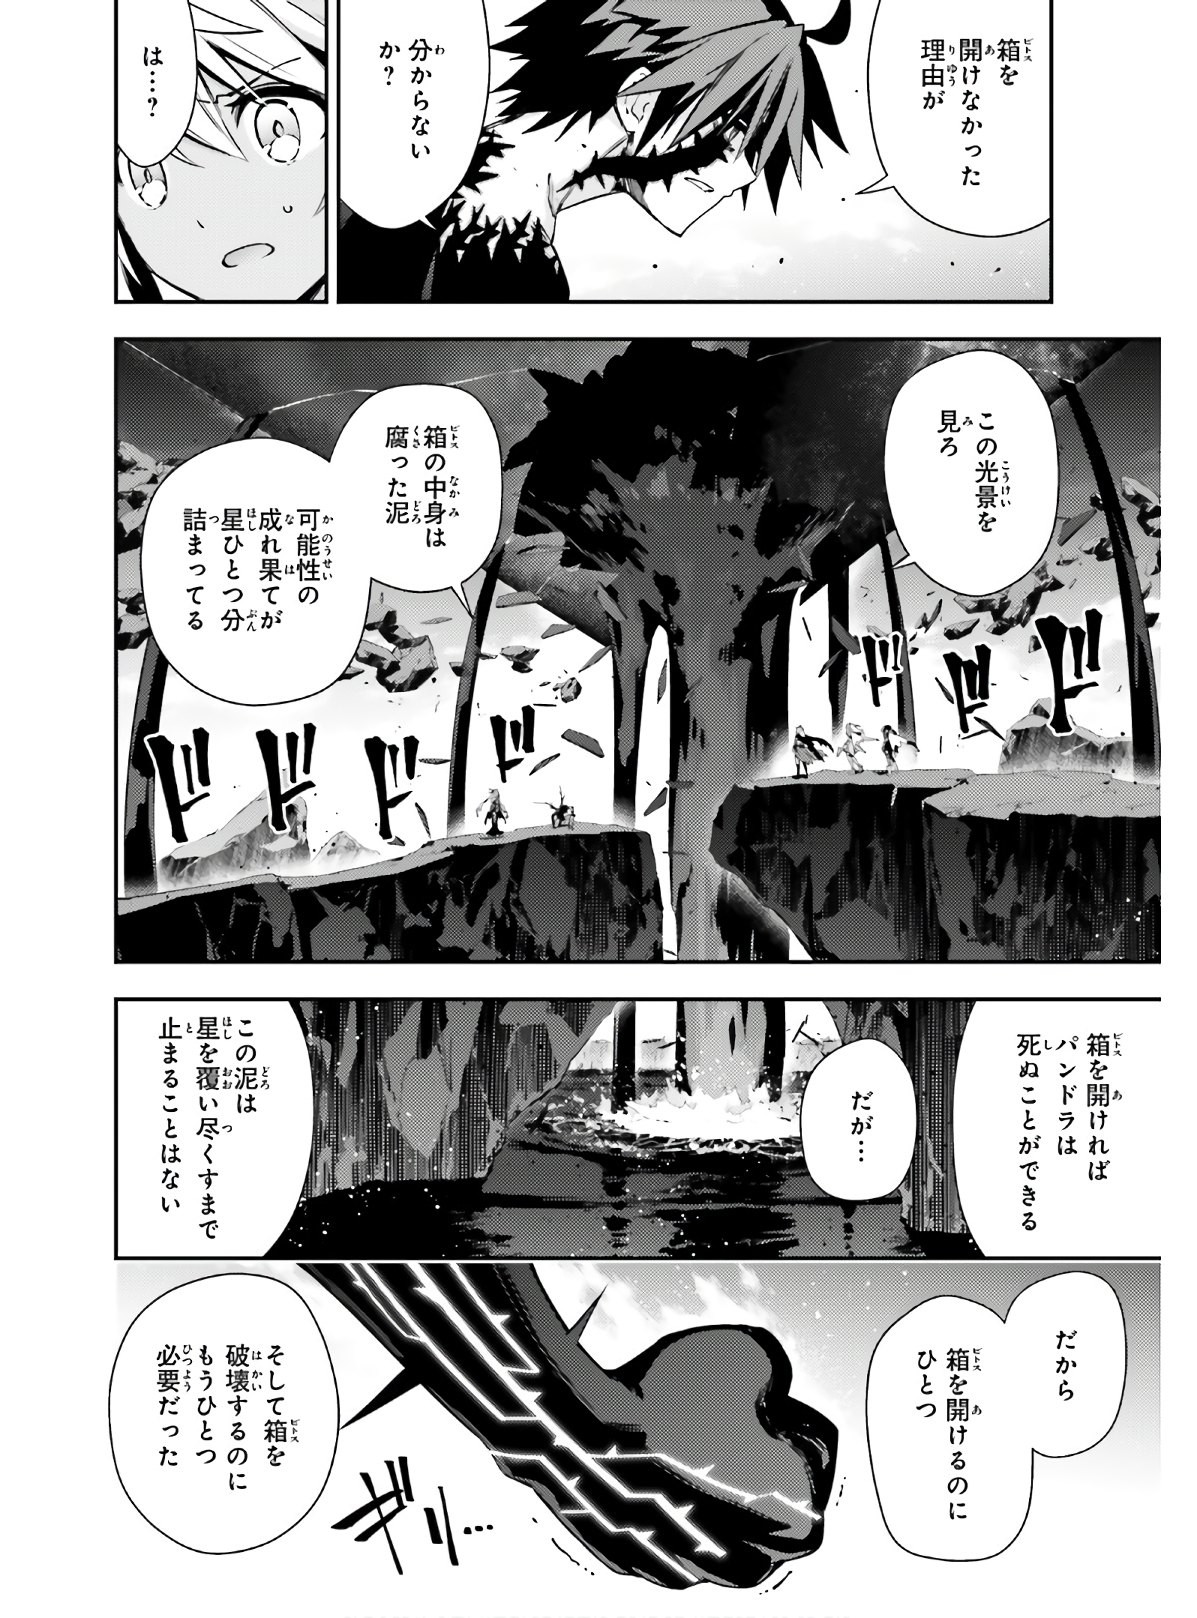 Fate/Kaleid Liner Prisma Illya Drei! - Chapter 57-2 - Page 4